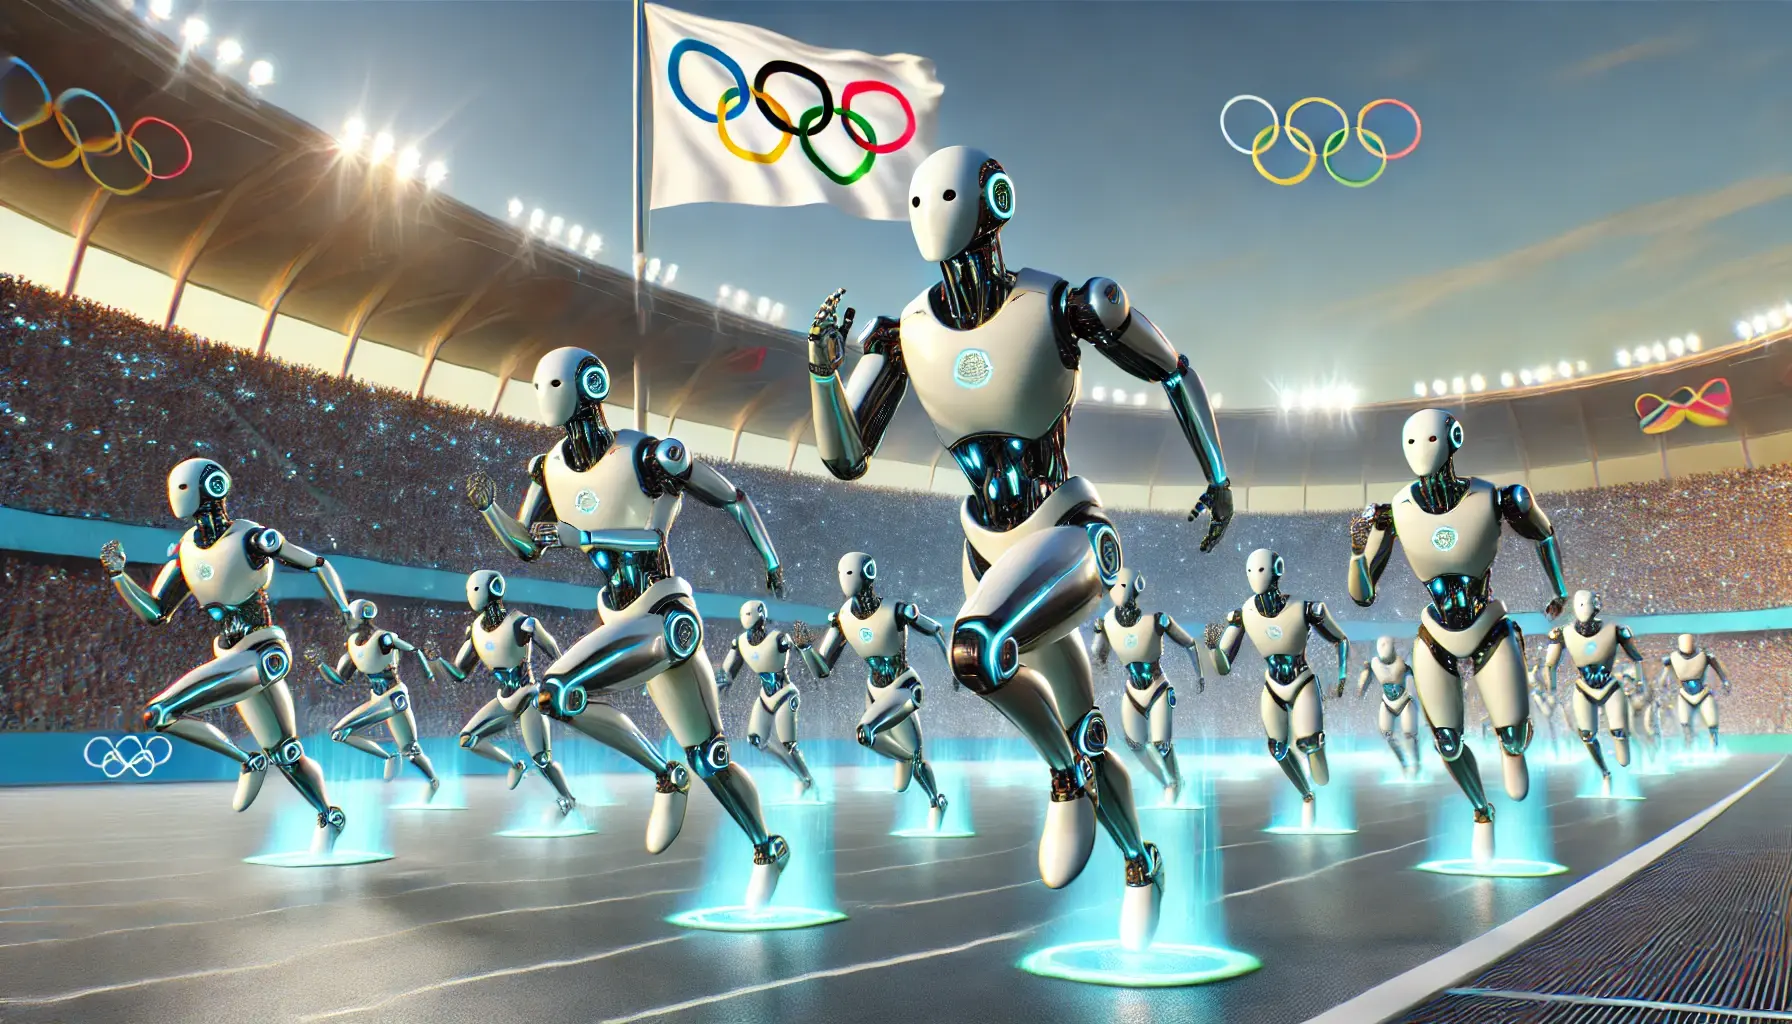 Paris 2024 Olympics technologies lead in innovation and sustainability [Video]